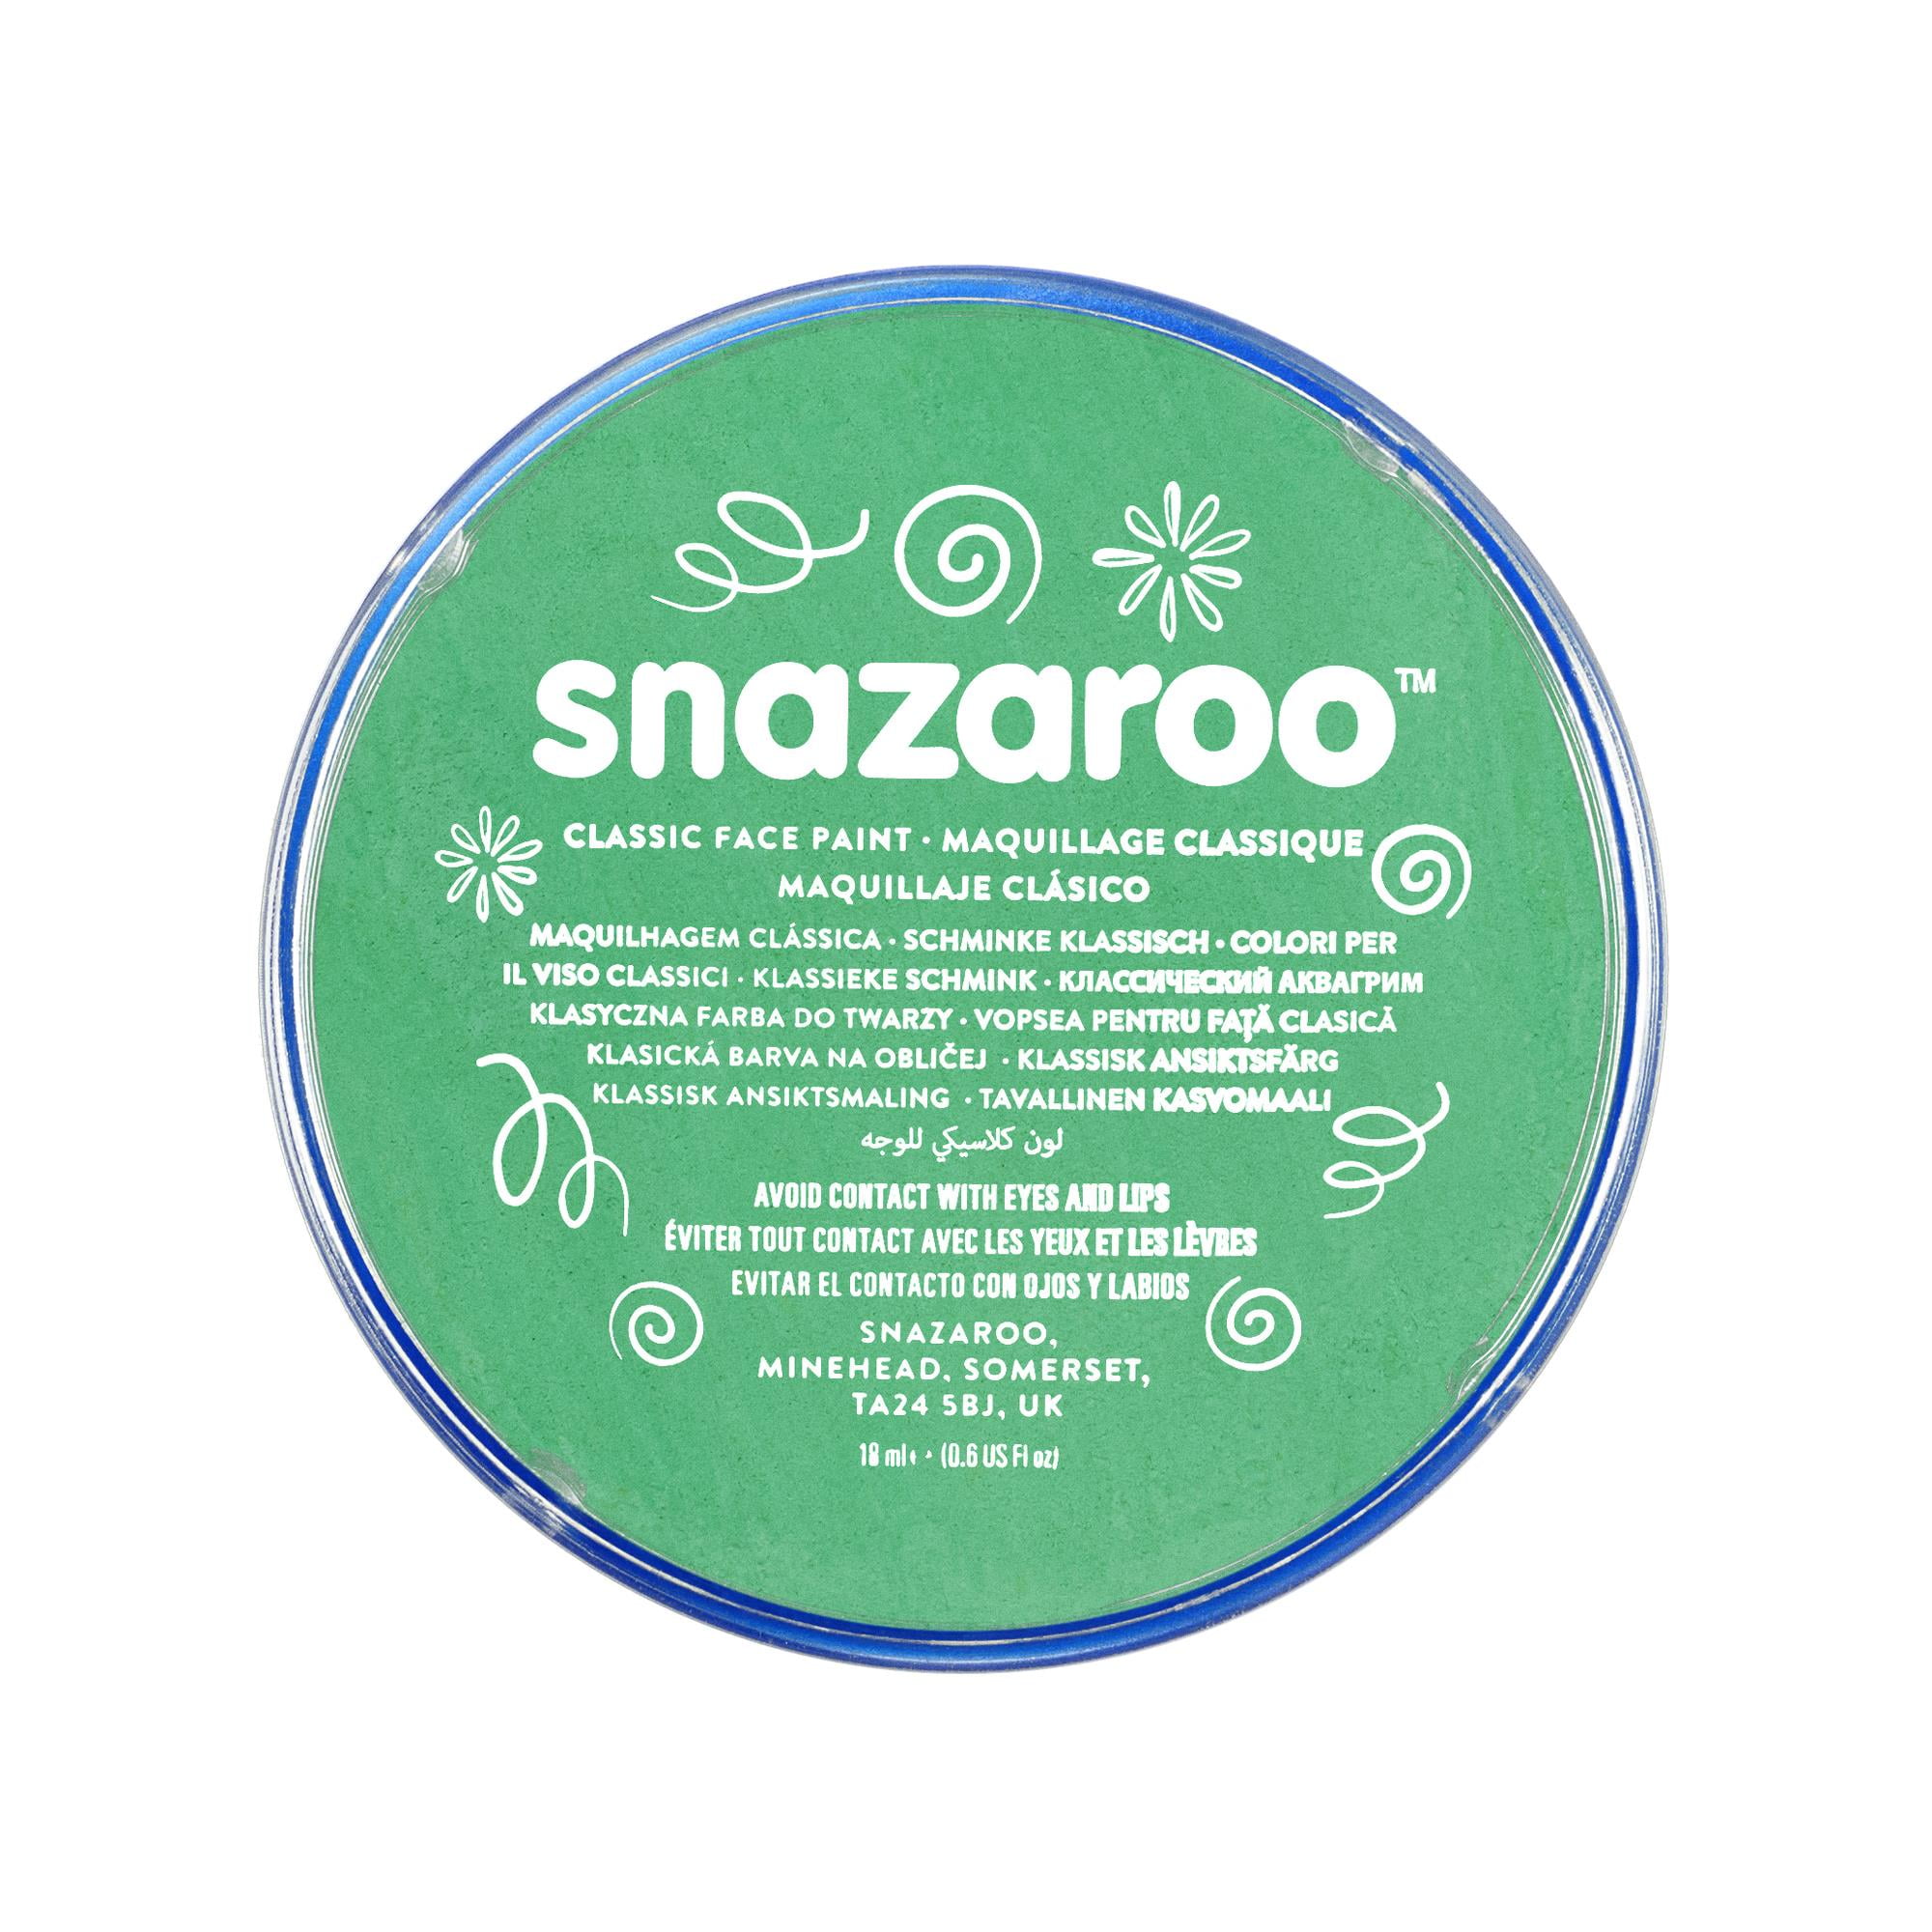 Snazaroo Classic Face Paint, 18ml, Lime Green 